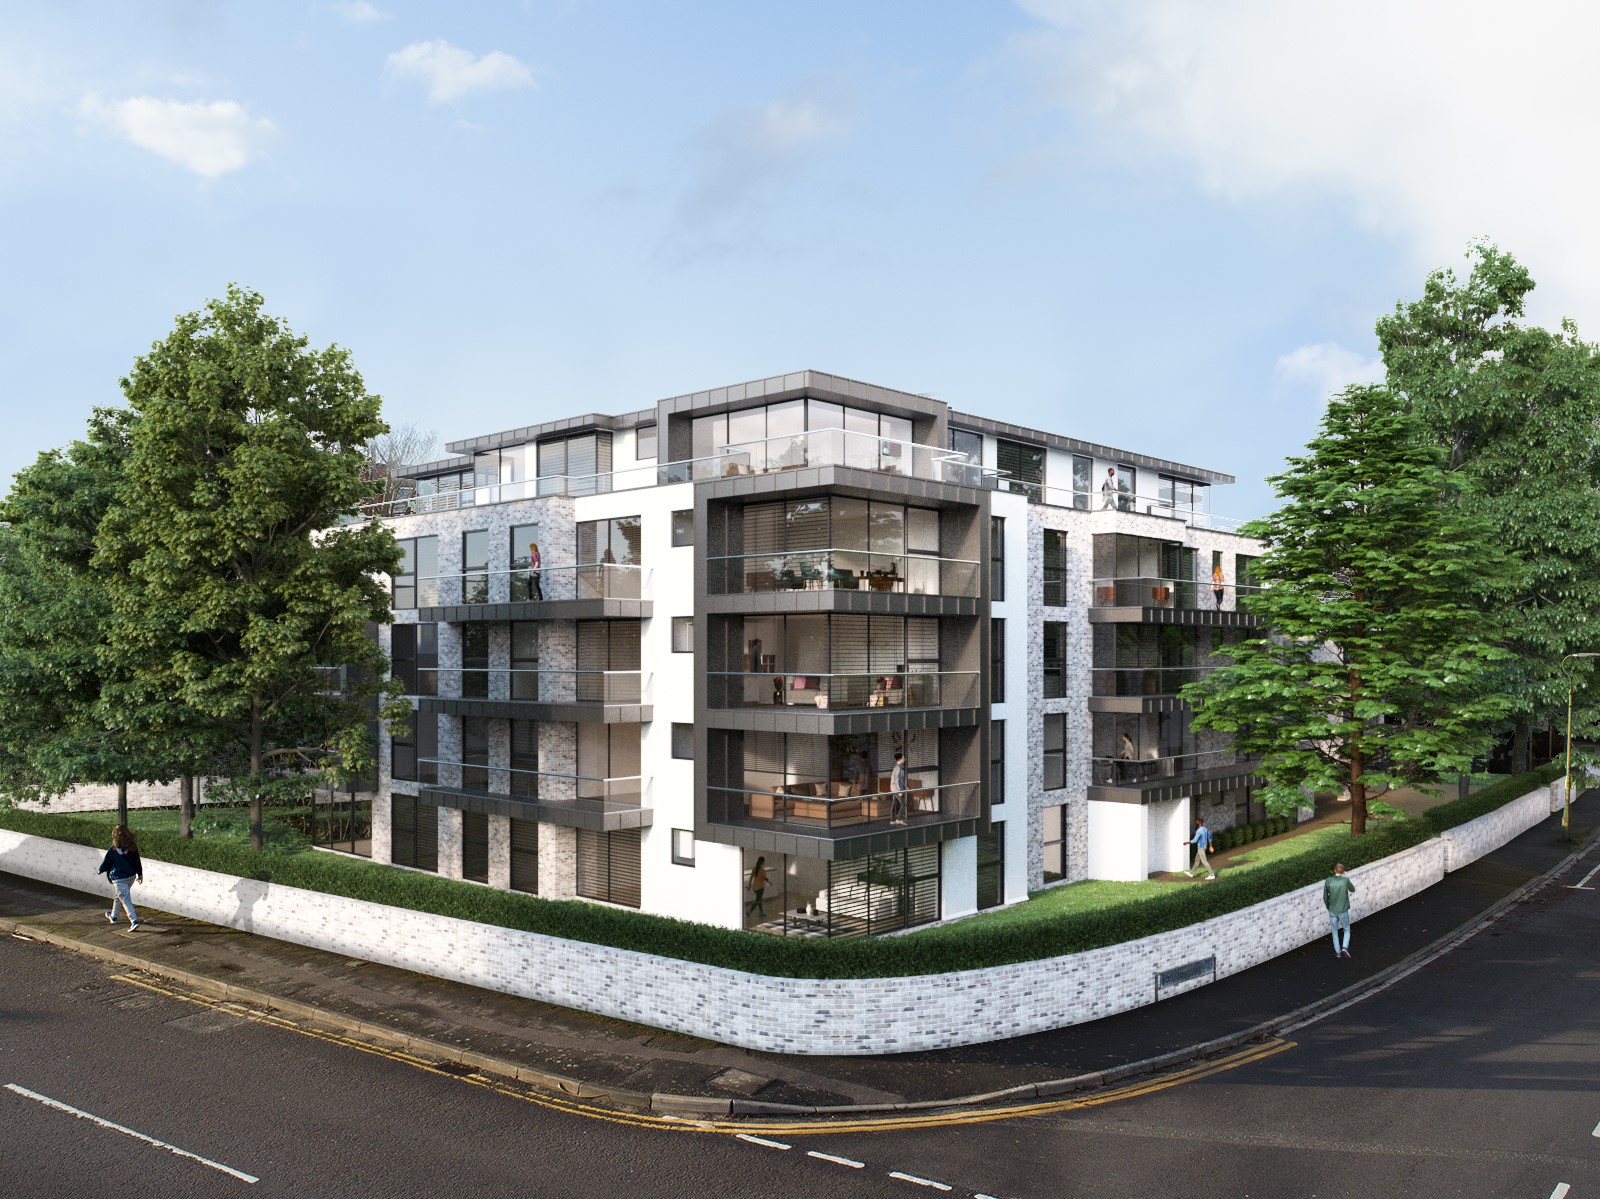 Liston Hotel – Boscombe Overcliff. Planning granted for 33 Stylish Apartments Across From the Beach.